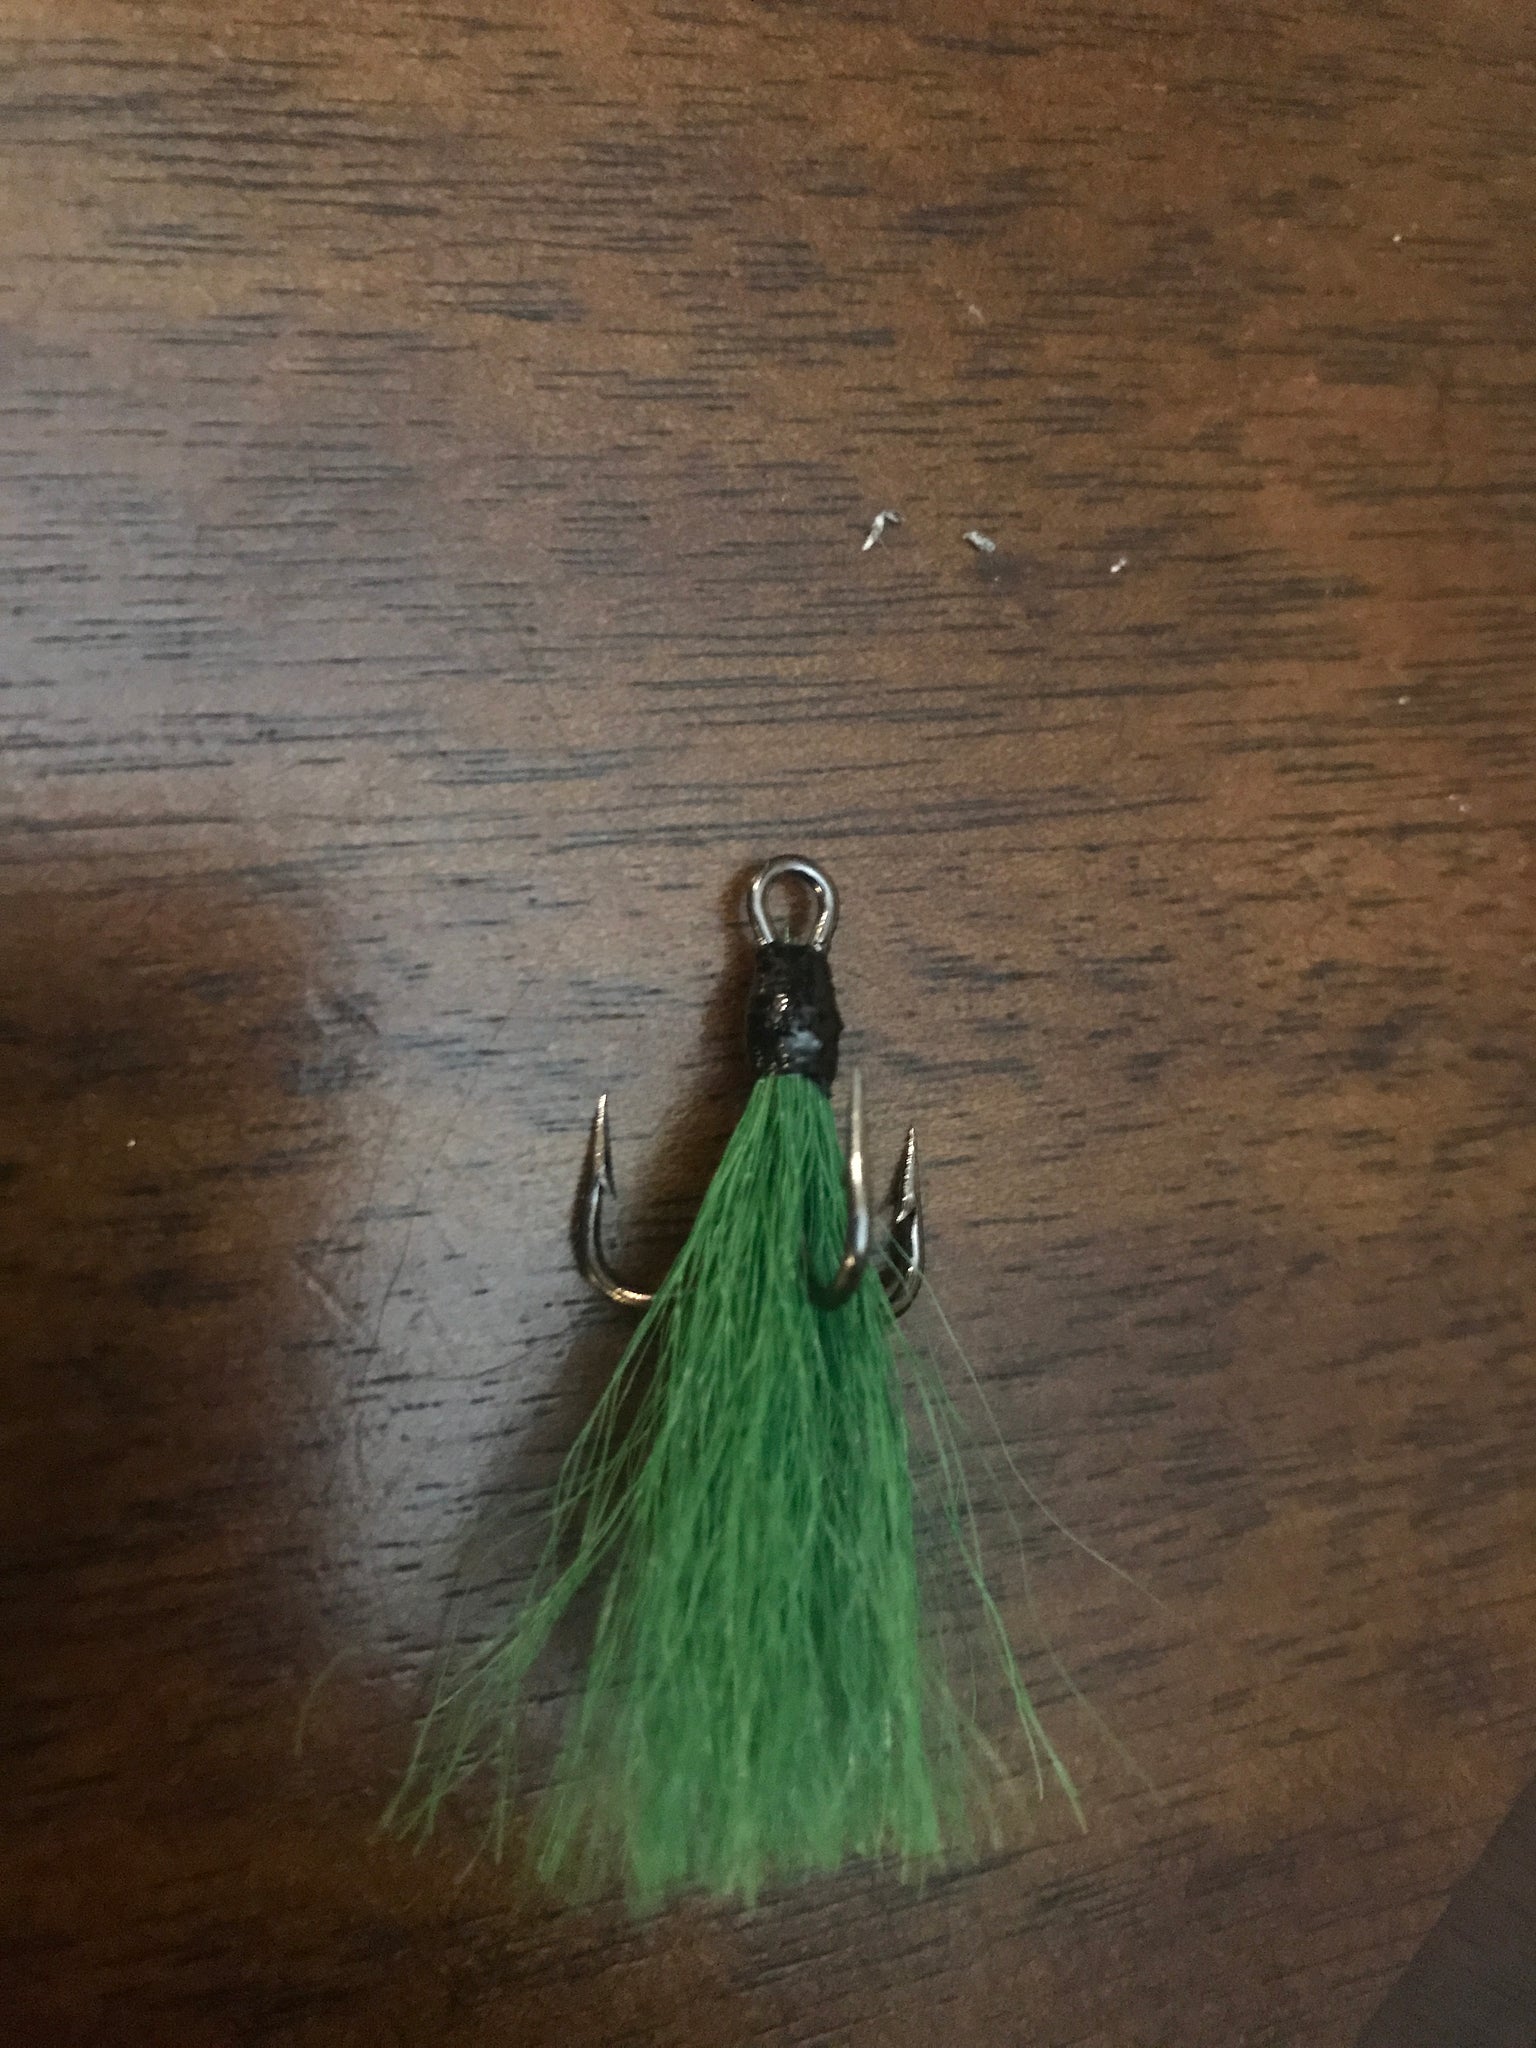 5 size #1 Dressed Bucktail treble hooks green flash white feather 4x strong